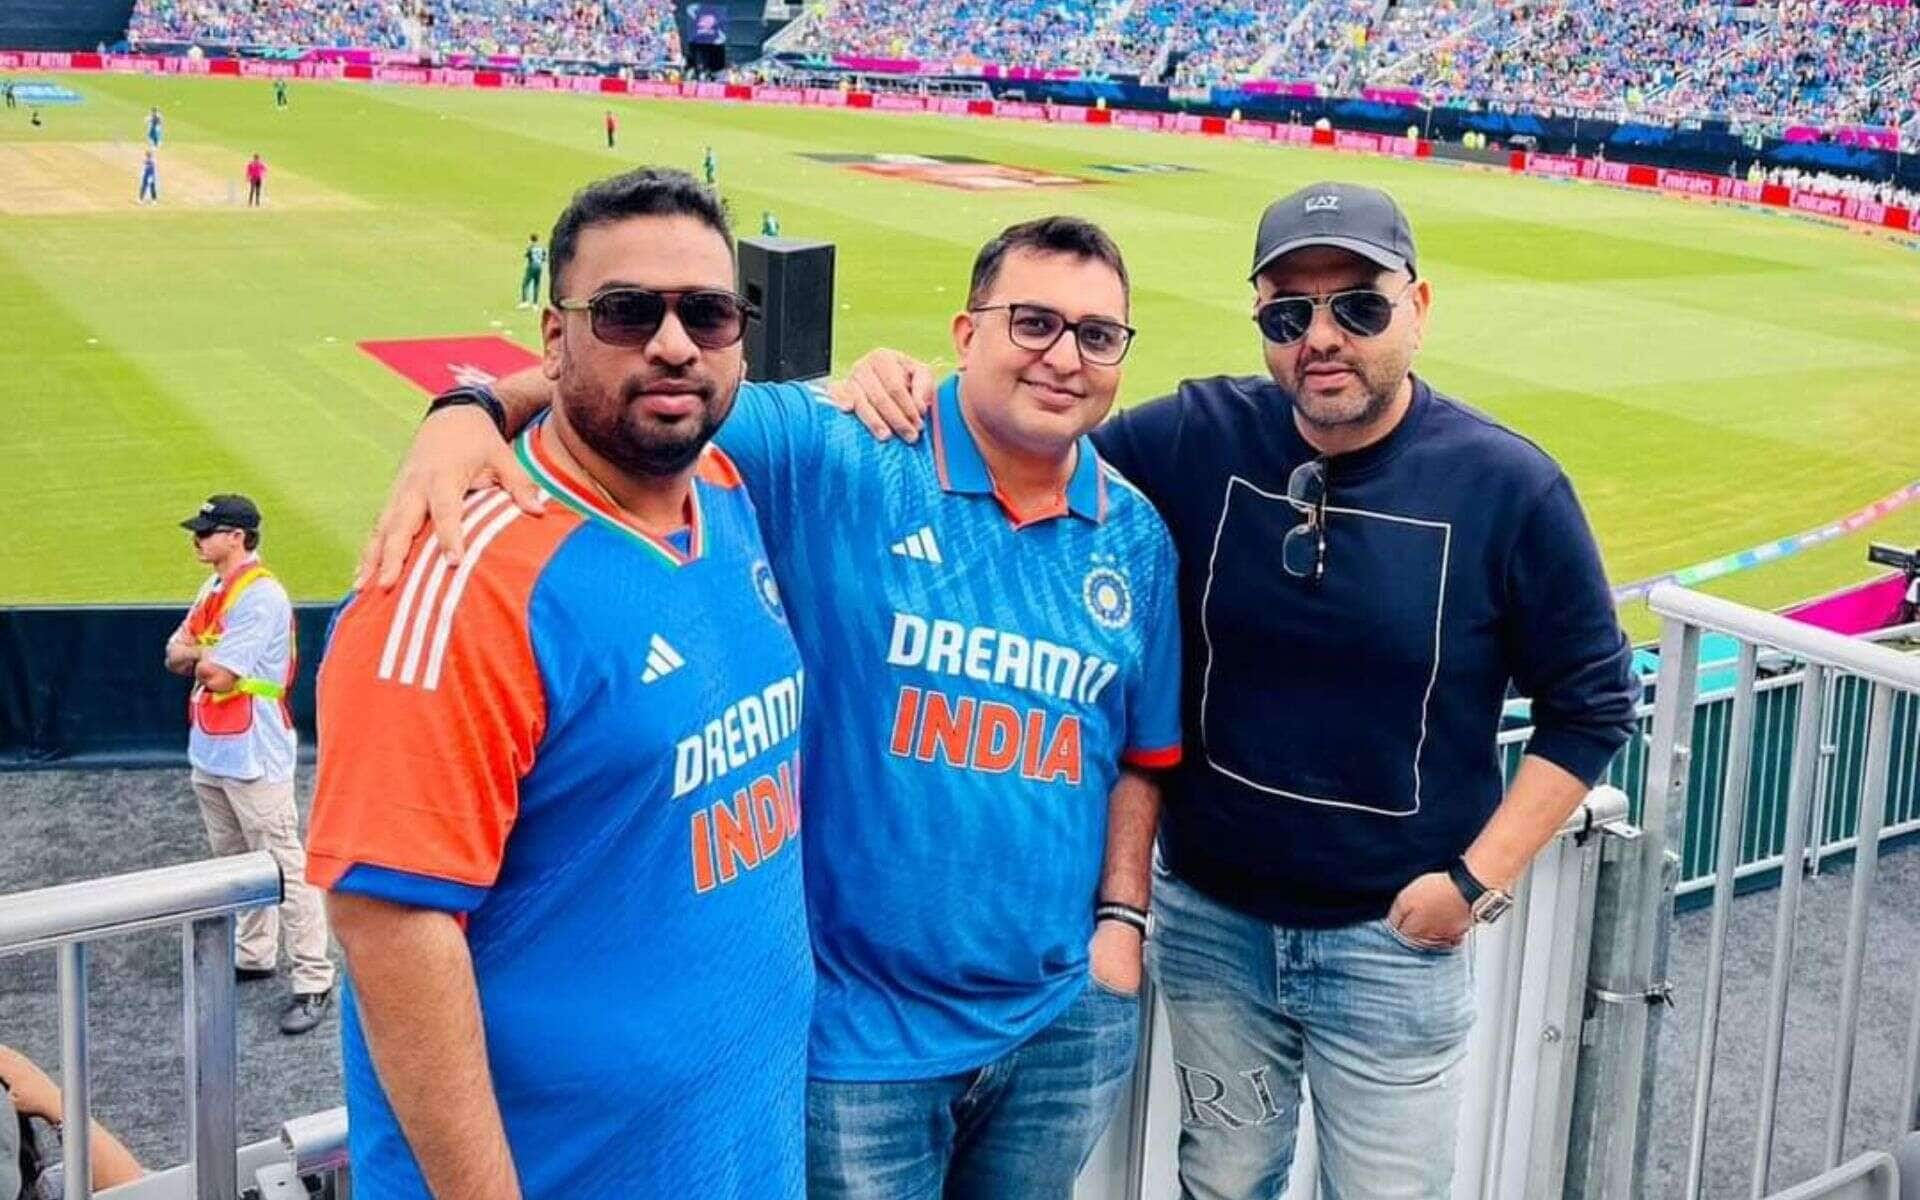 Amol Kale was present in New York for IND vs PAK (x.com)